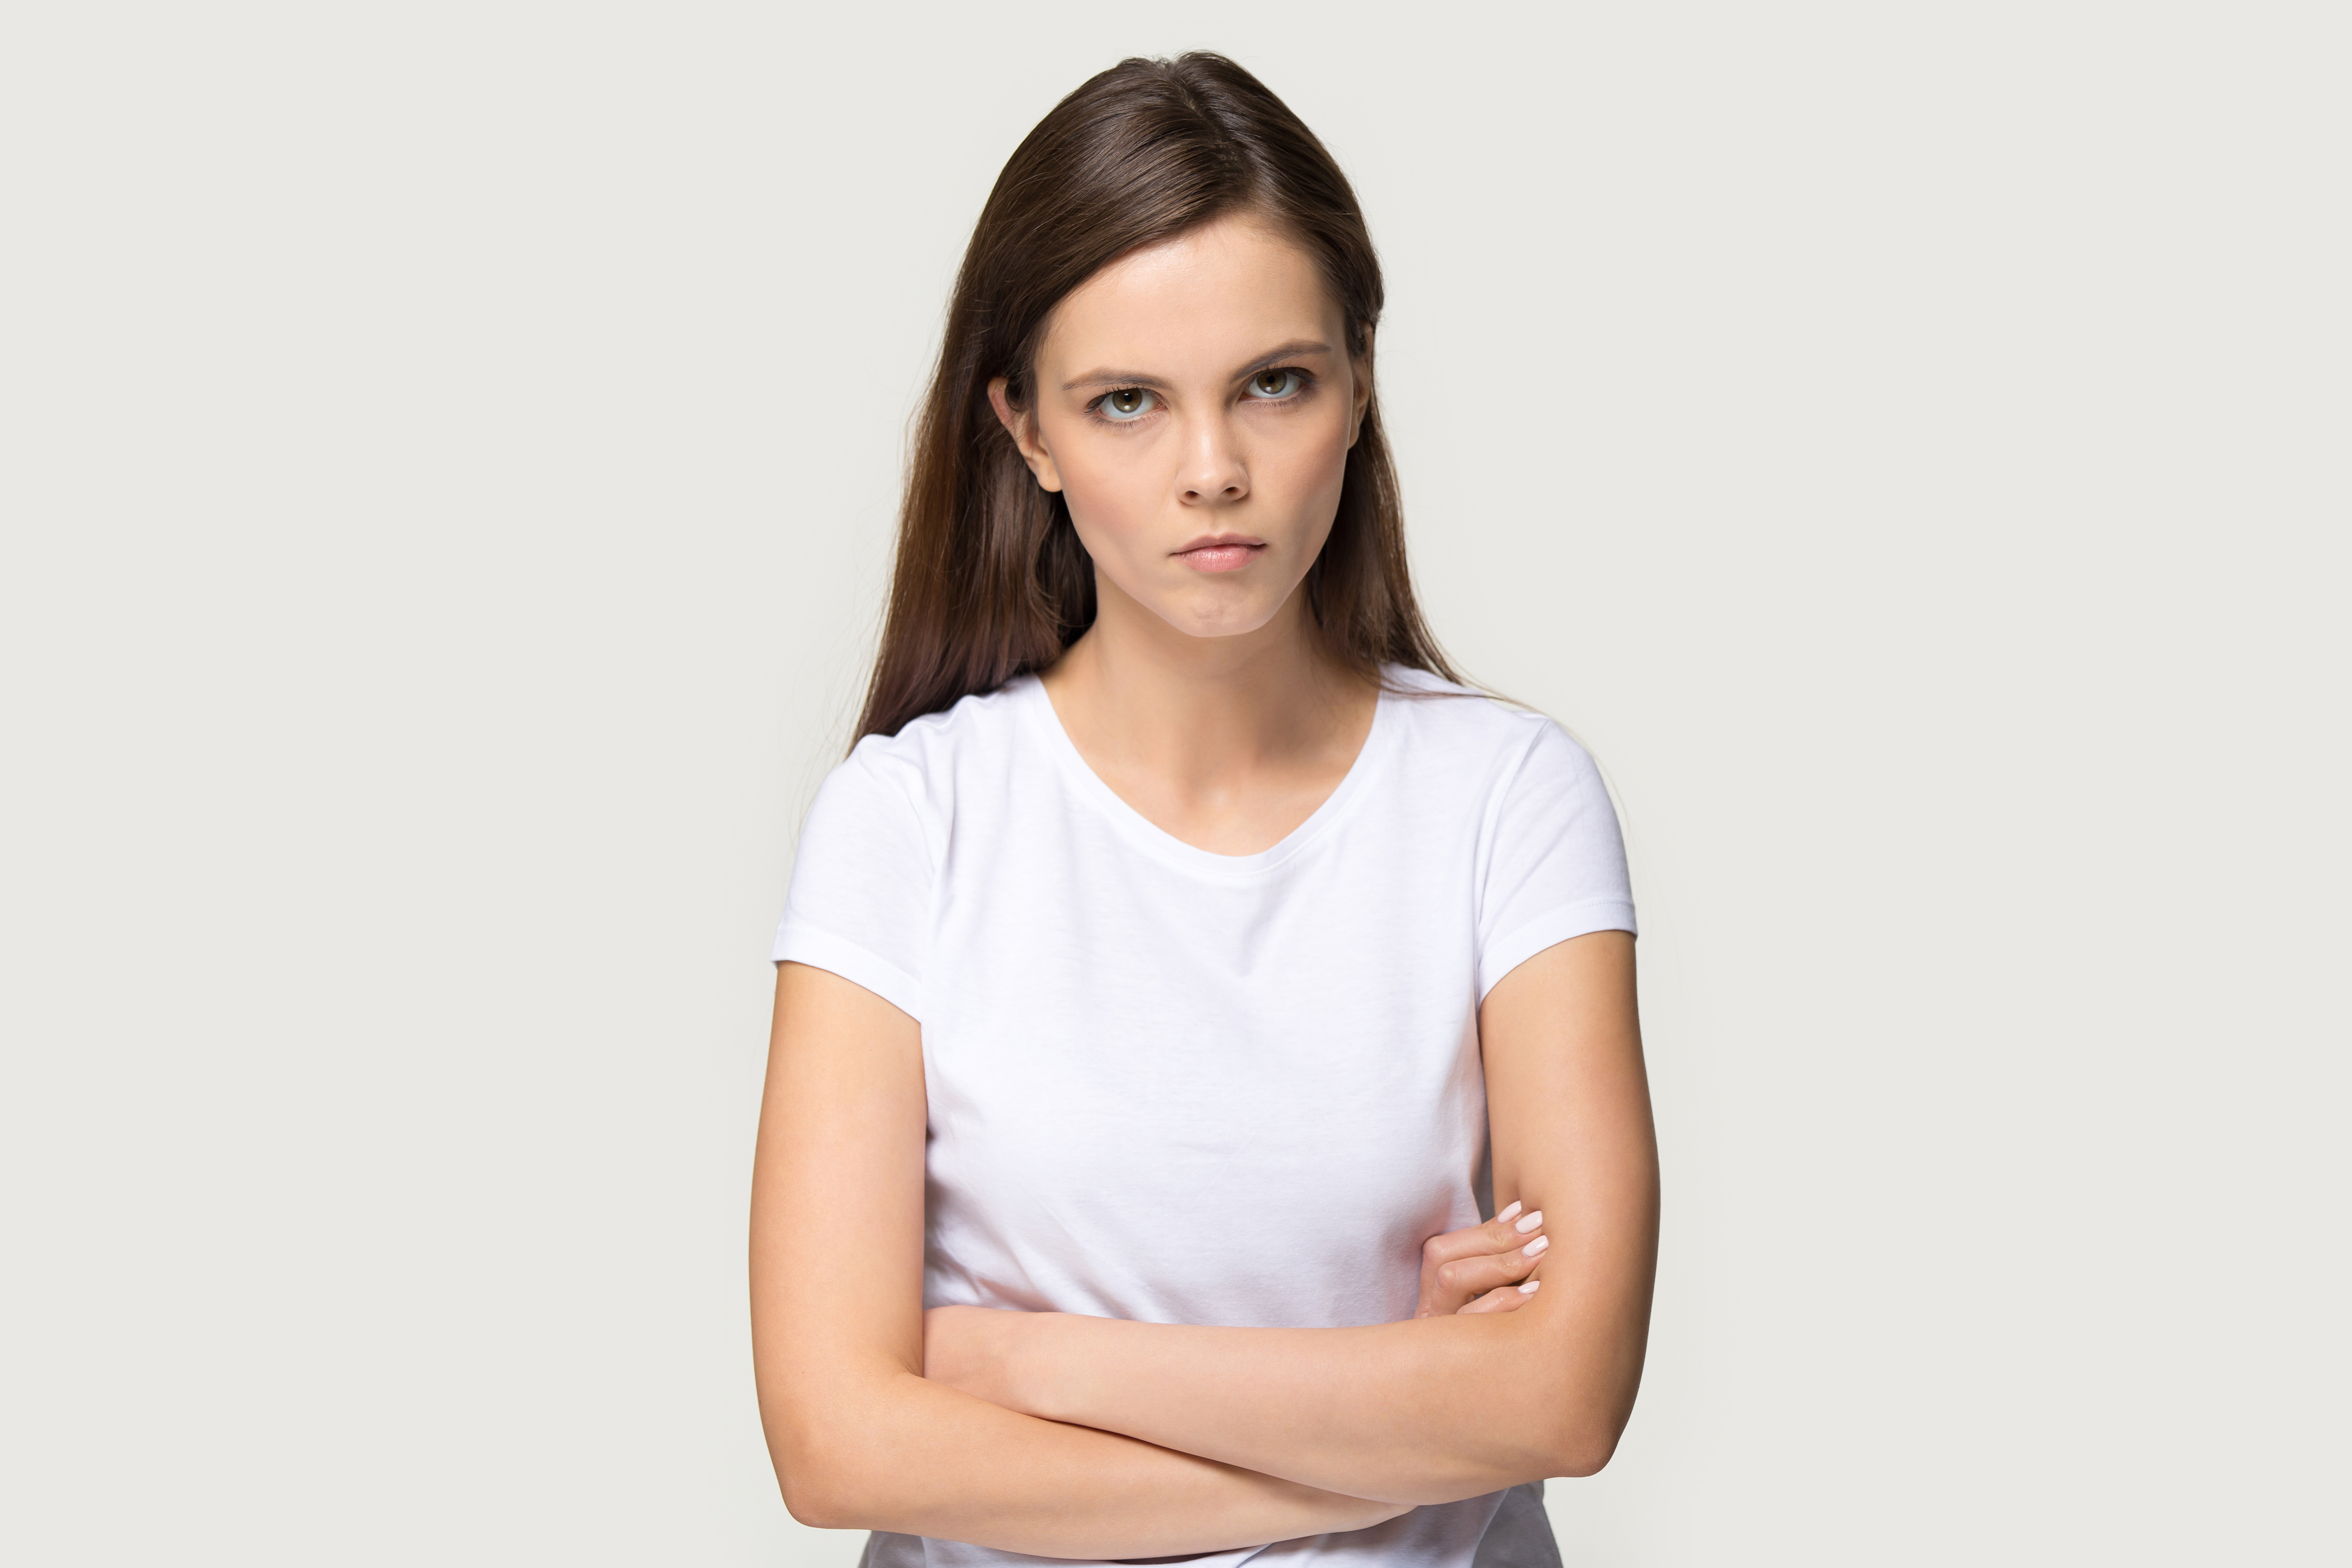 An angry young woman standing with her arms crossed | Source: Shutterstock